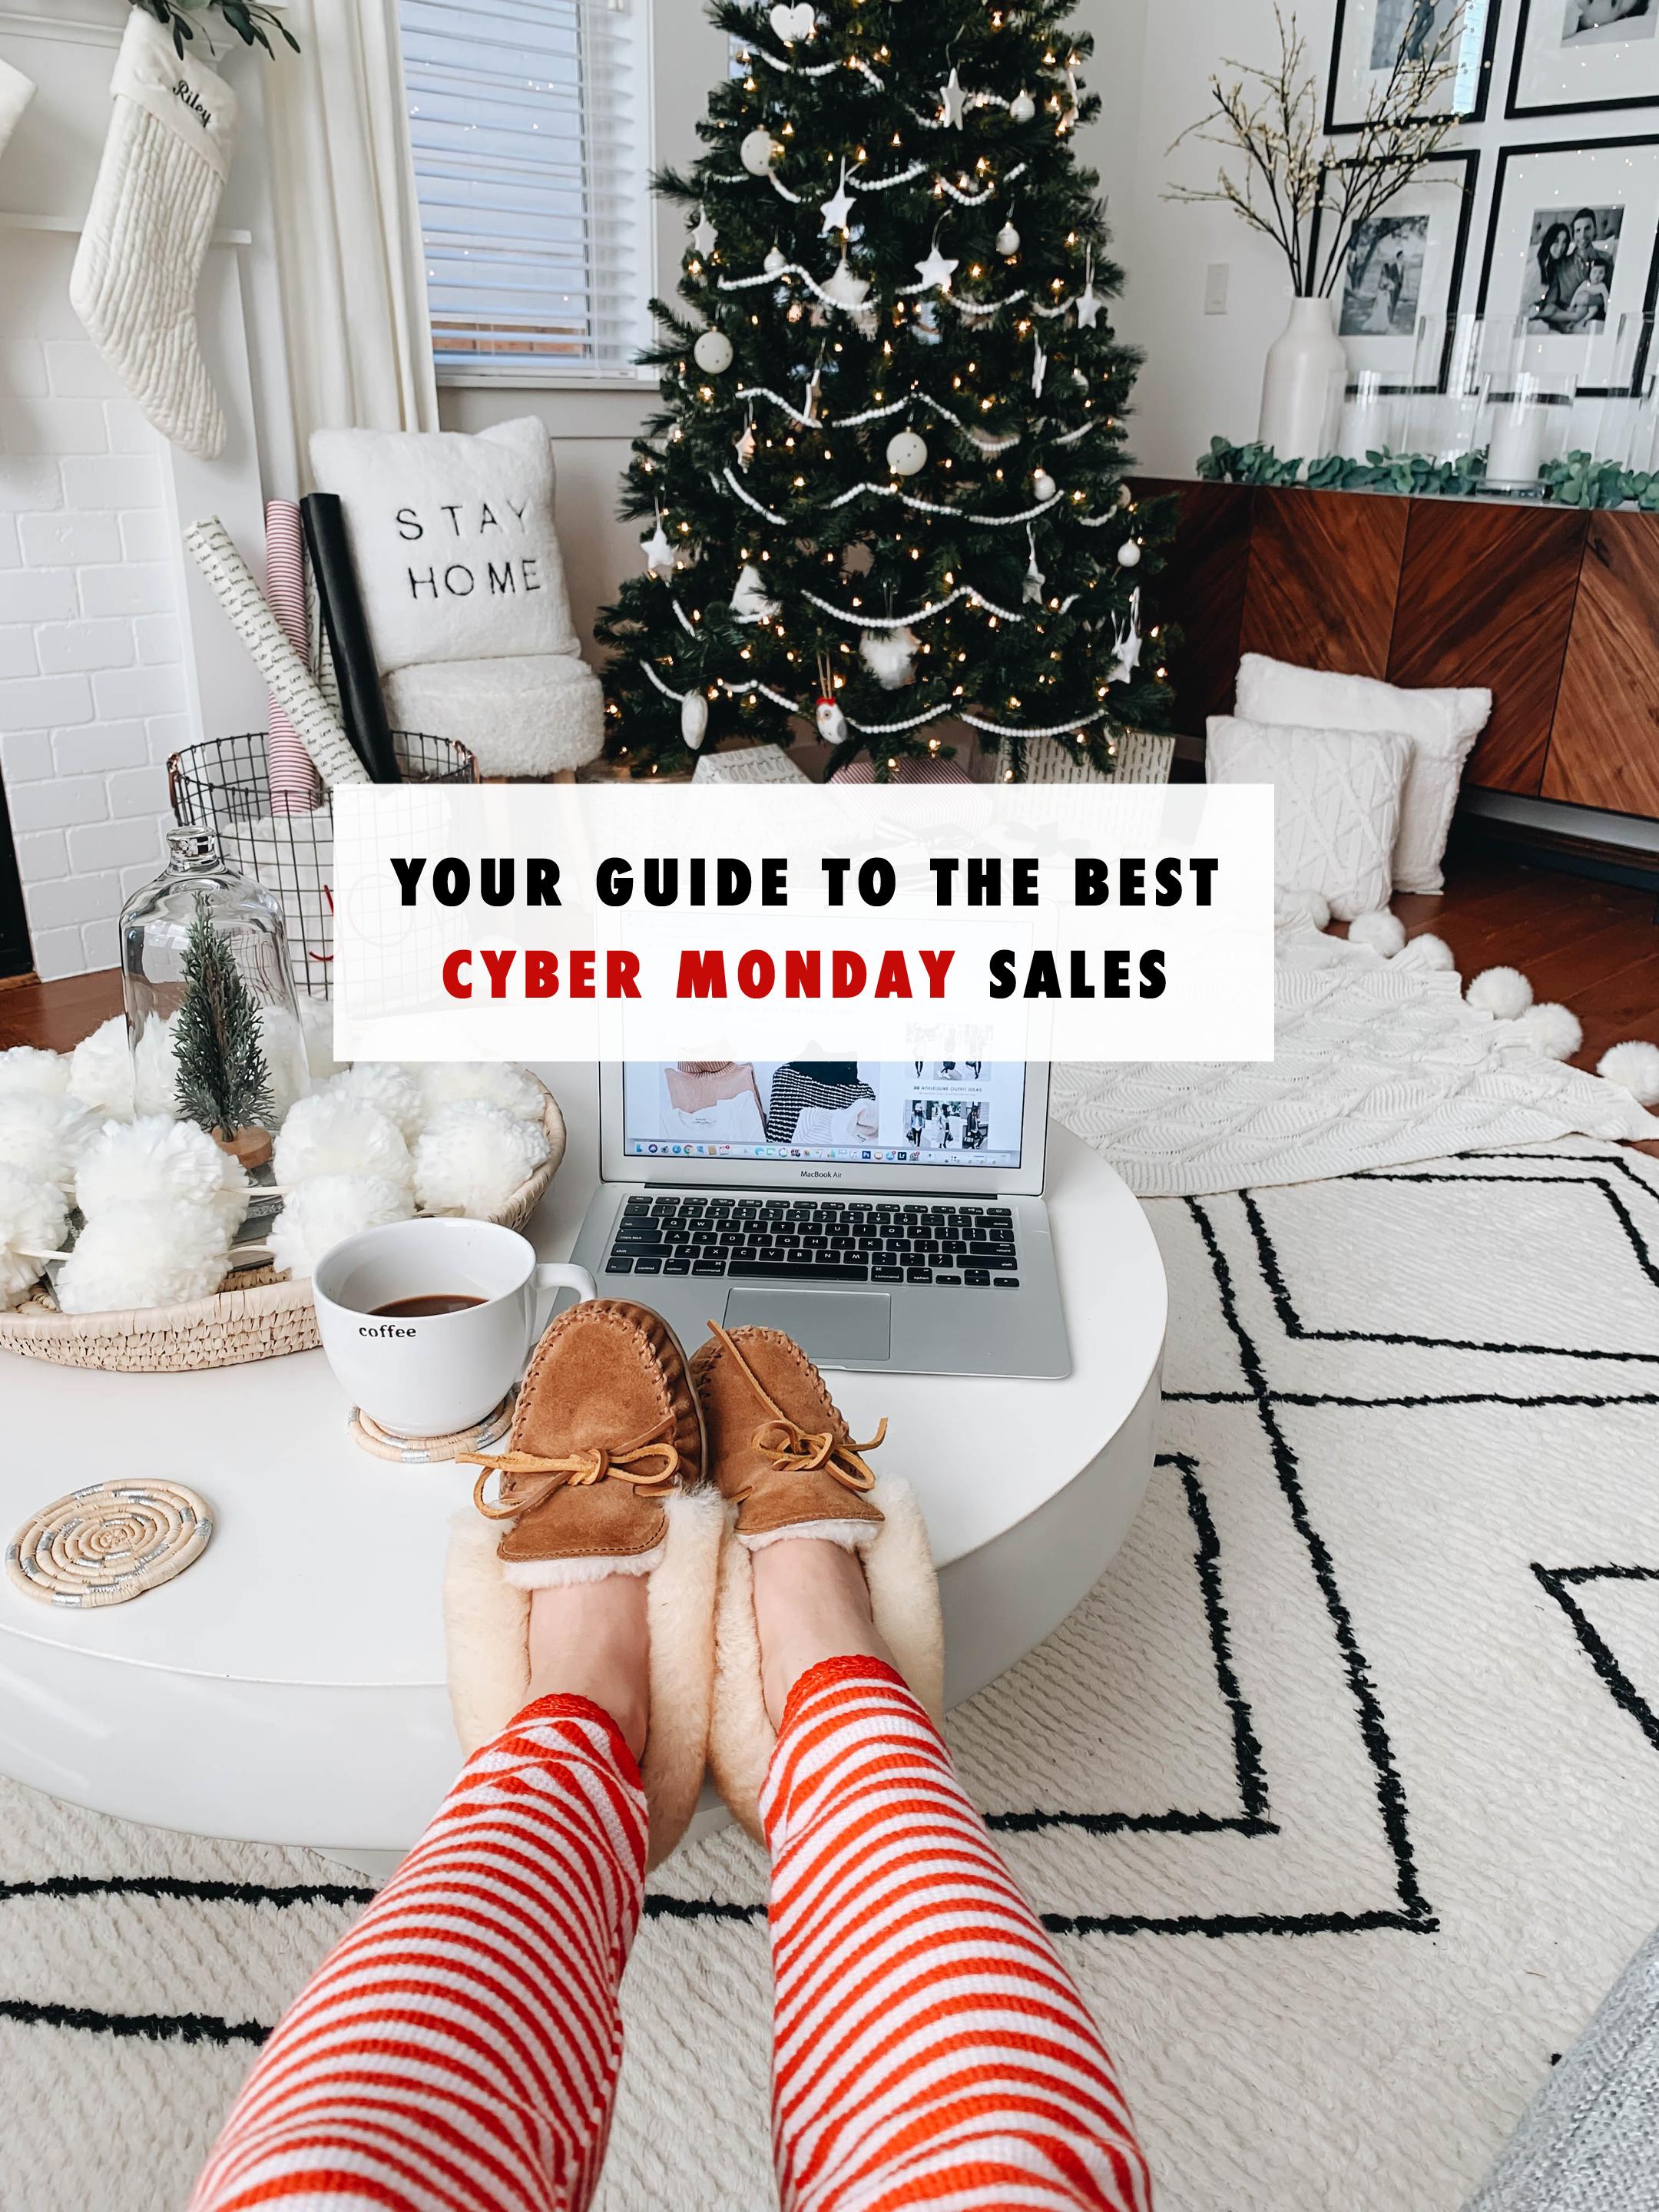 THE BEST CYBER MONDAY SALES